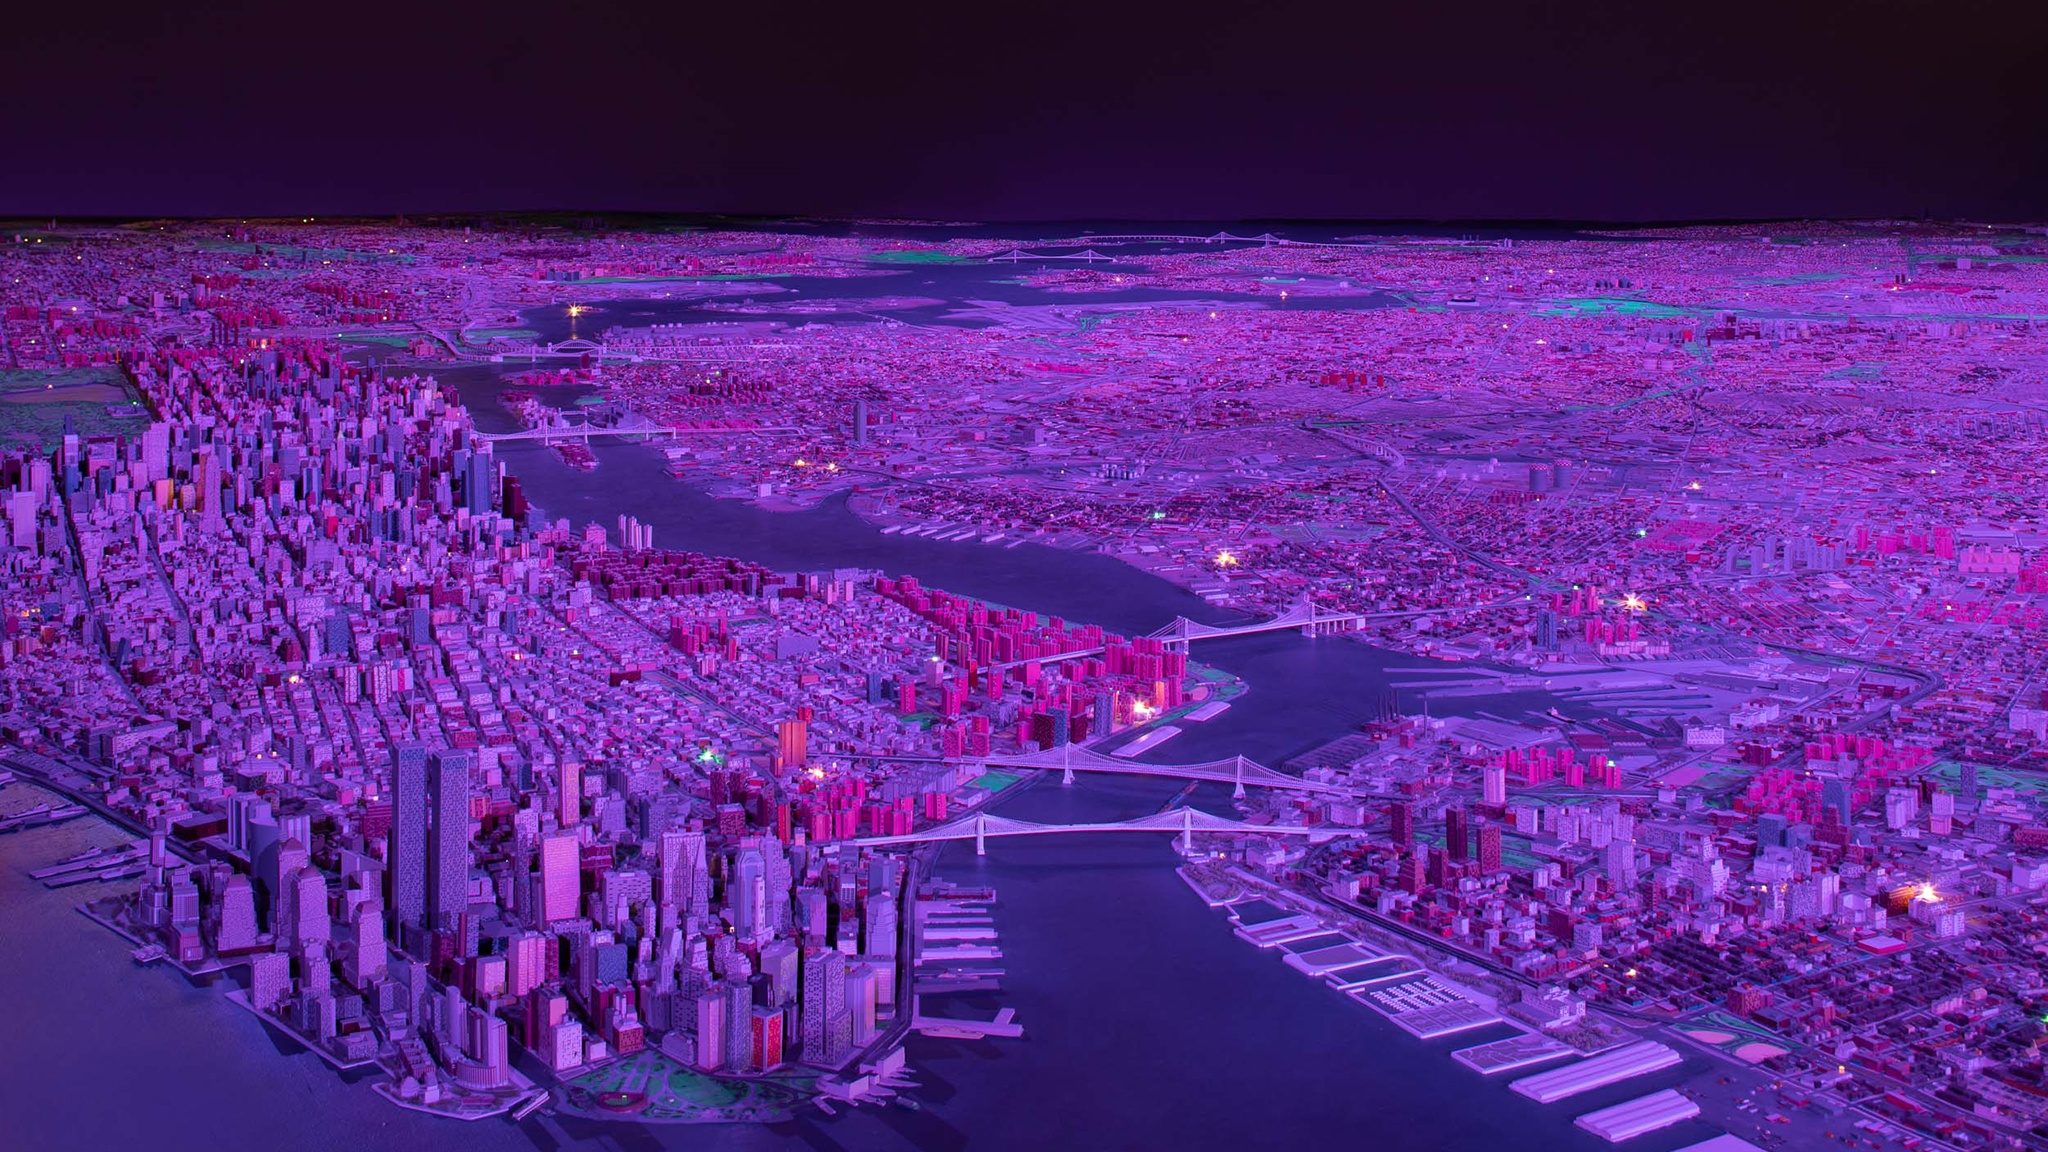 A scale model of New York City bathed in deep purple light as if in the middle of the night